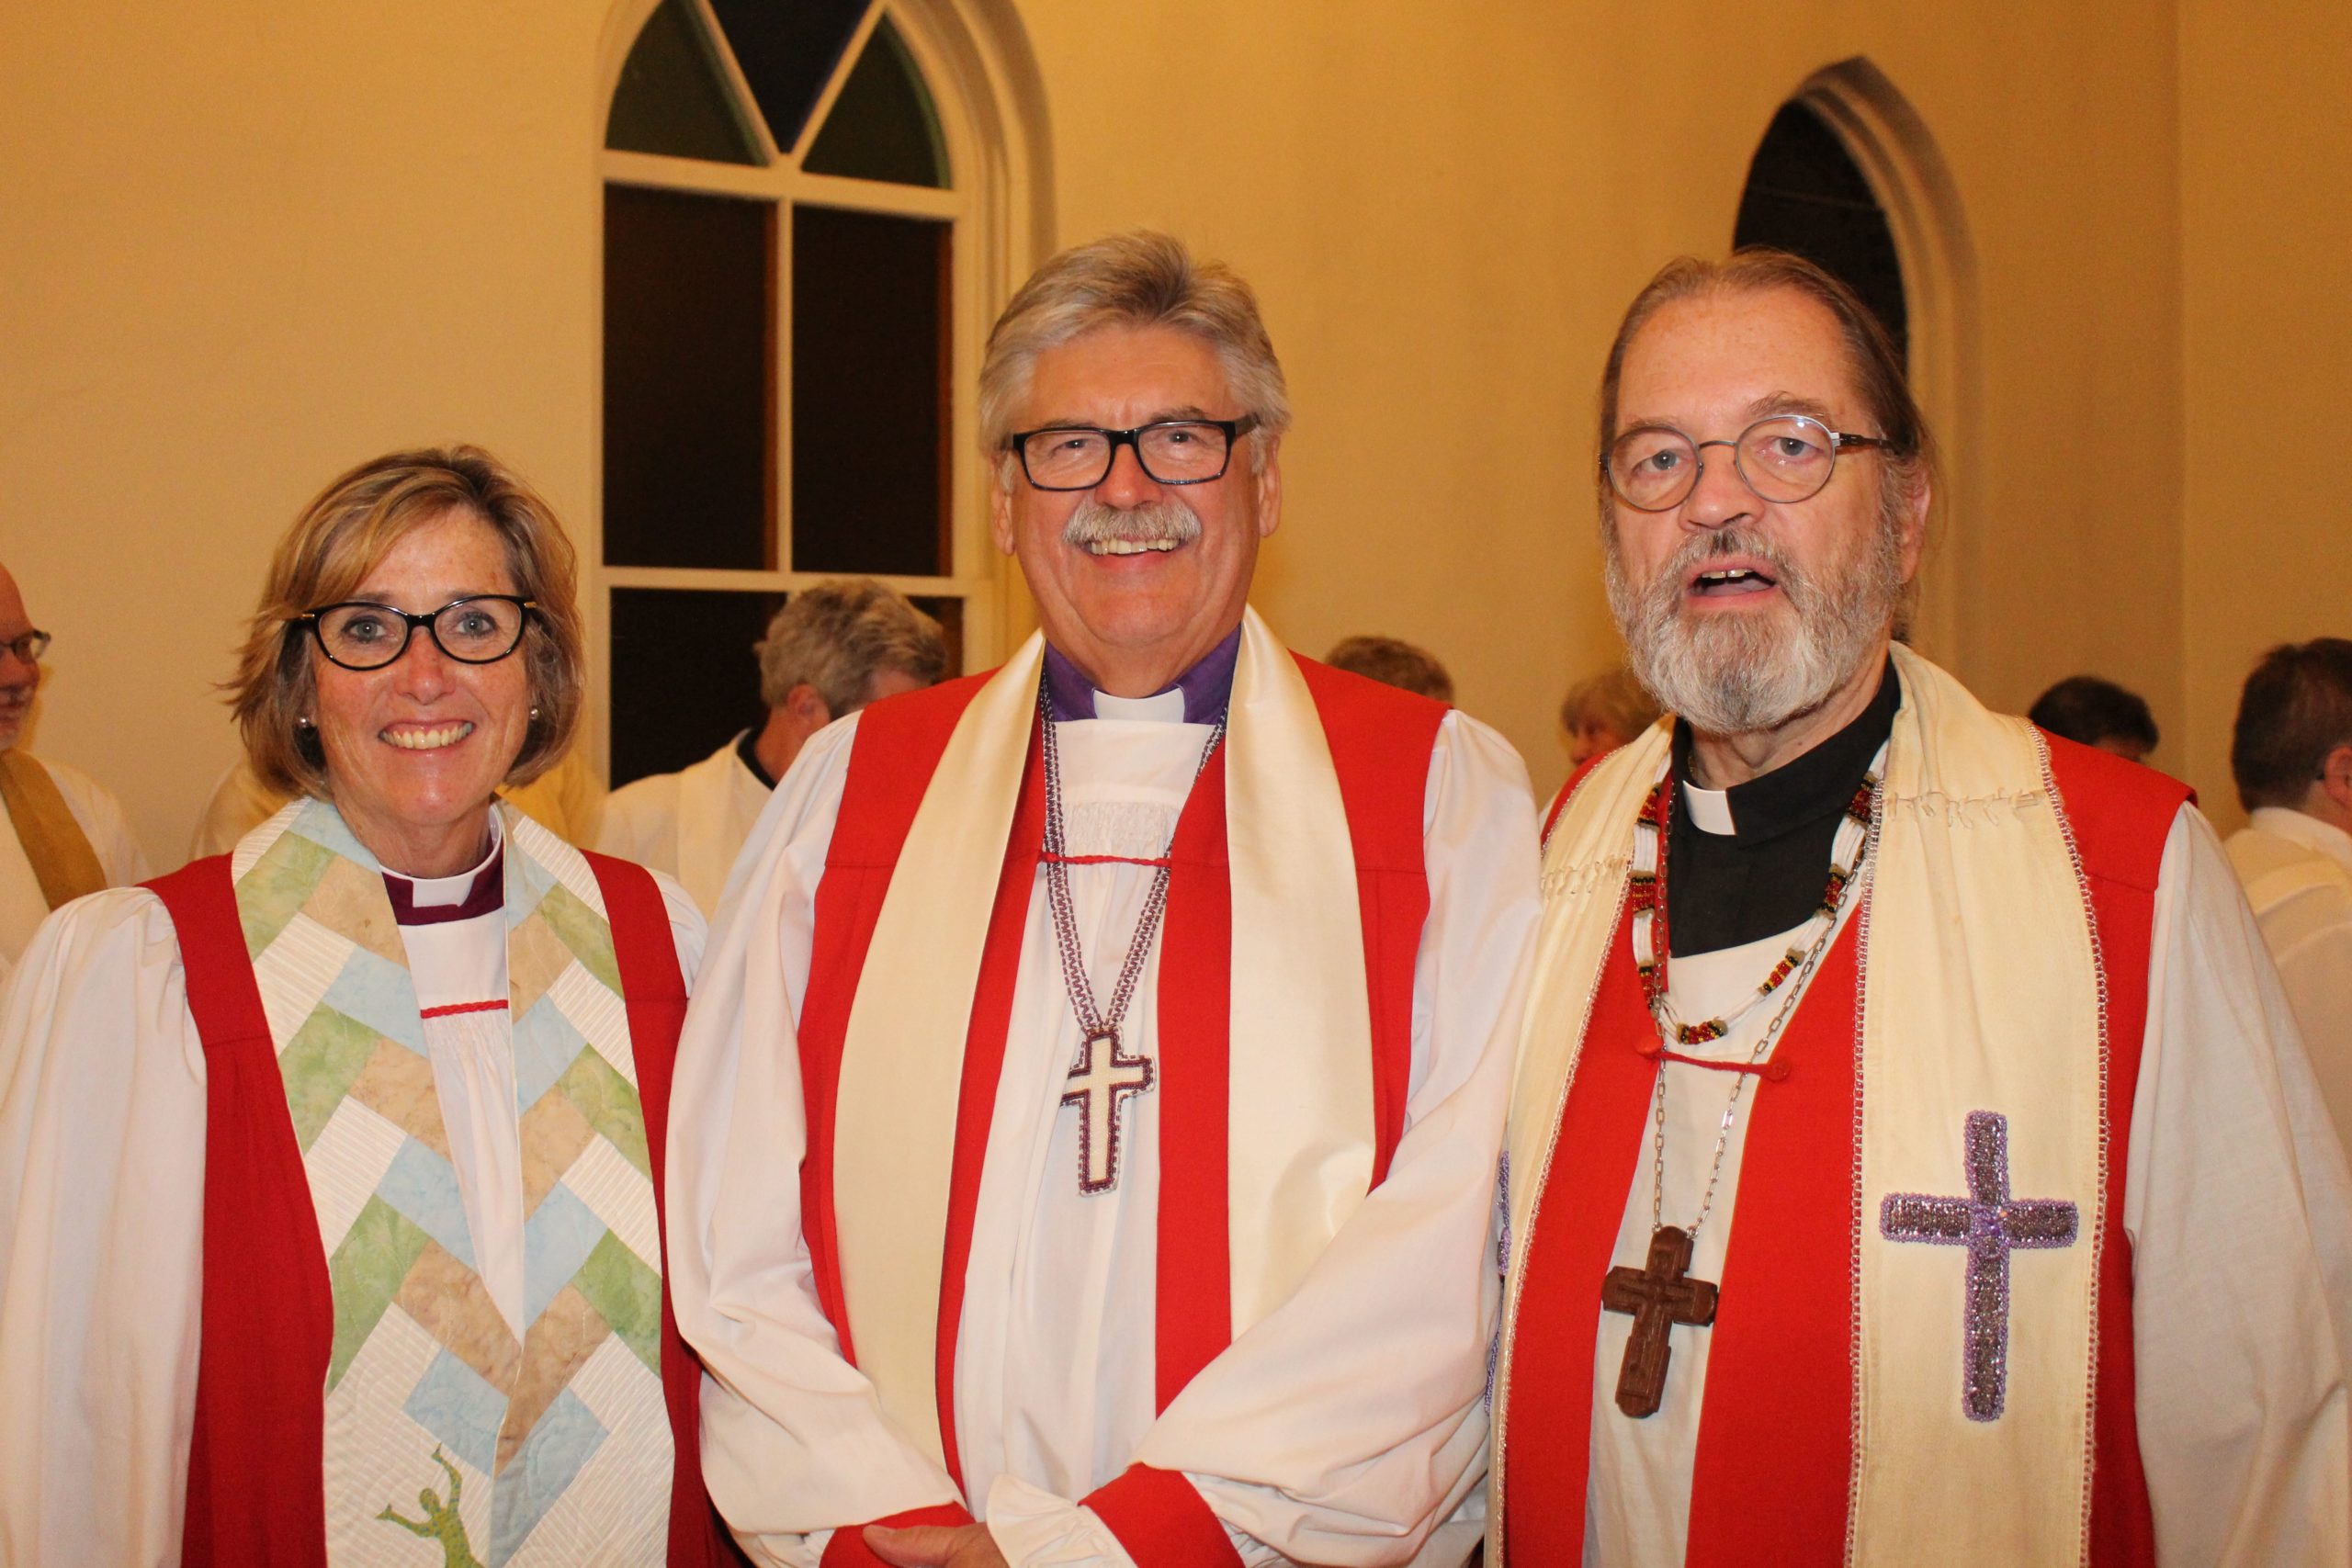 Tom Corston (centre) pictured with Archbishops Anne Germond (left) and Mark MacDonald (right)